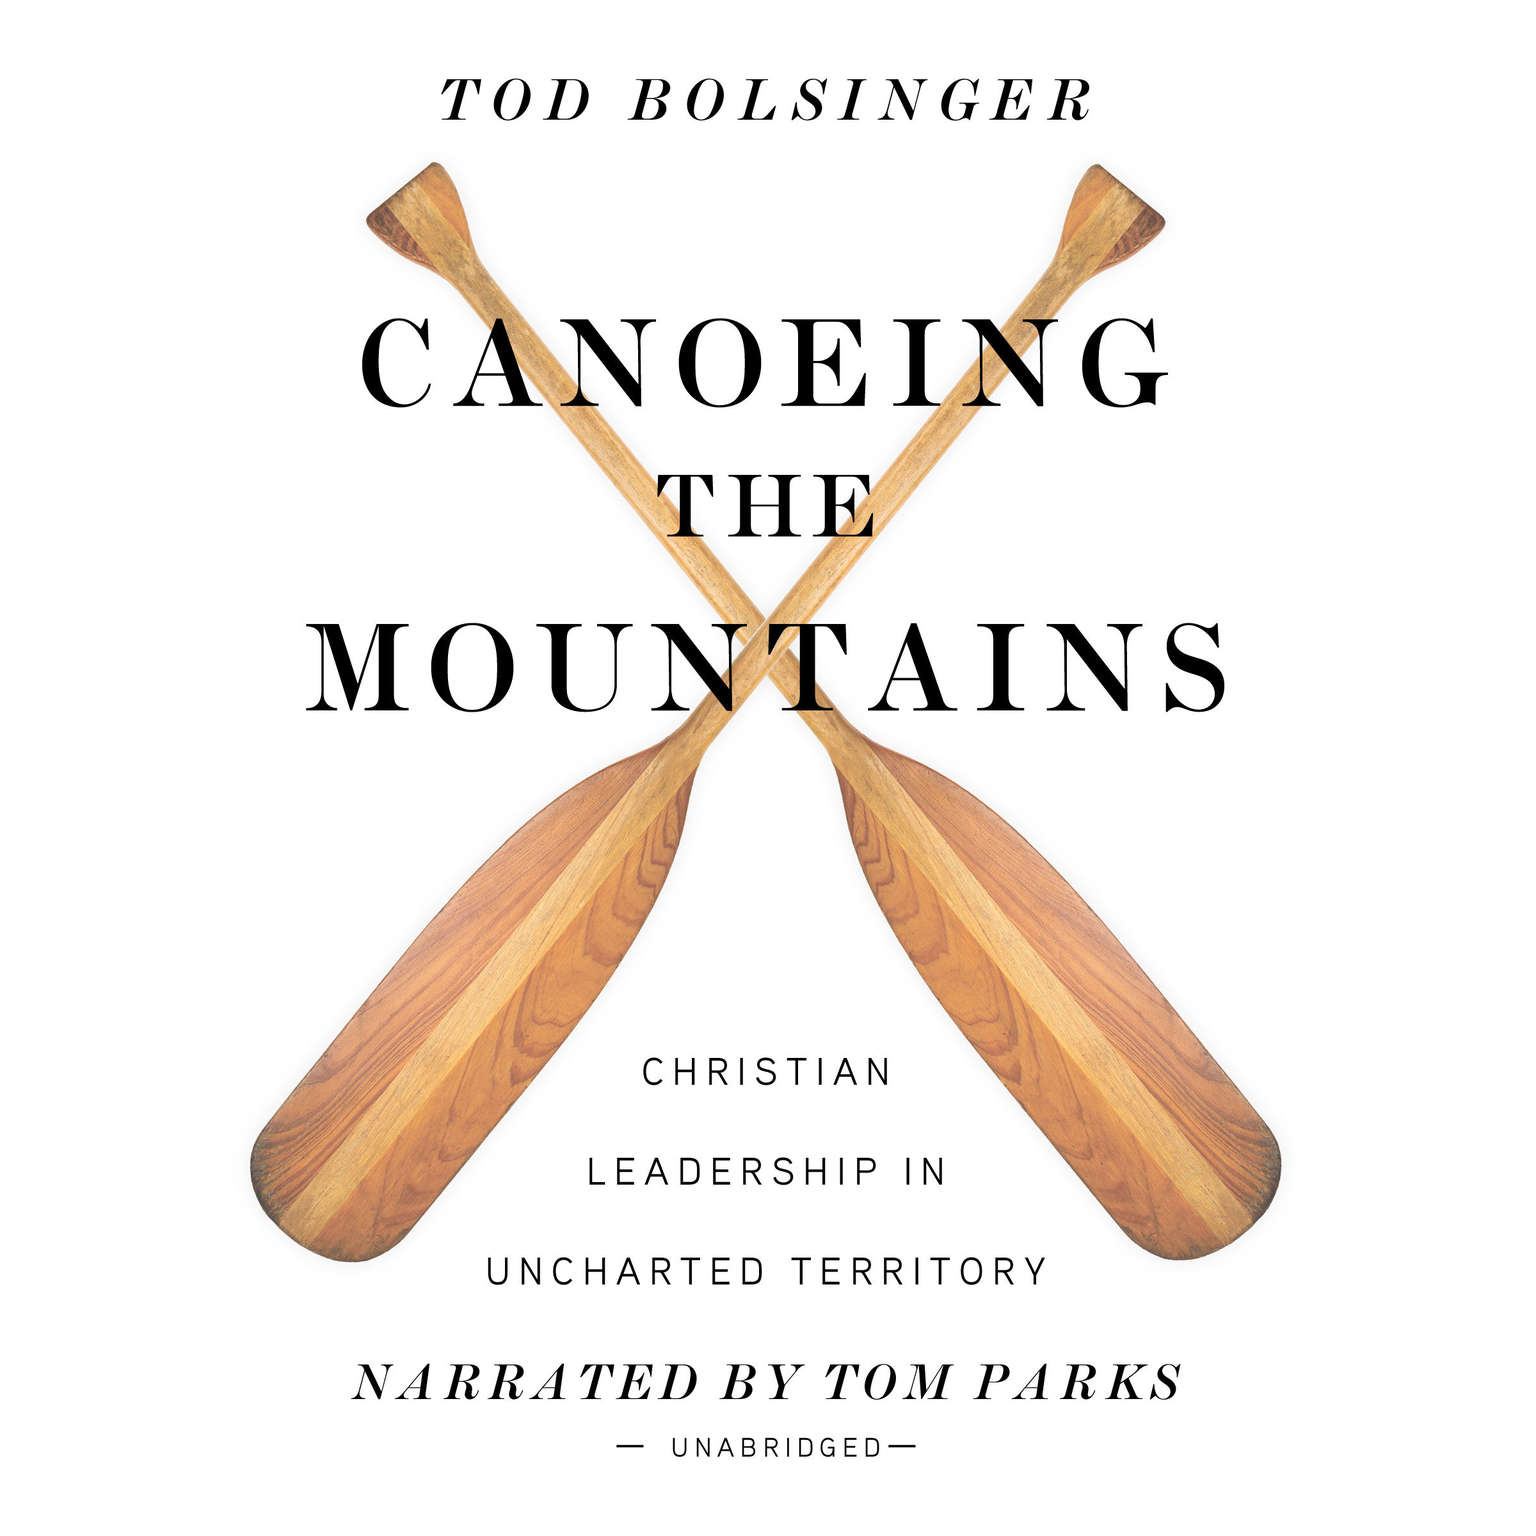 Canoeing the Mountains: Christian Leadership in Uncharted Territory Audiobook, by Tod Bolsinger